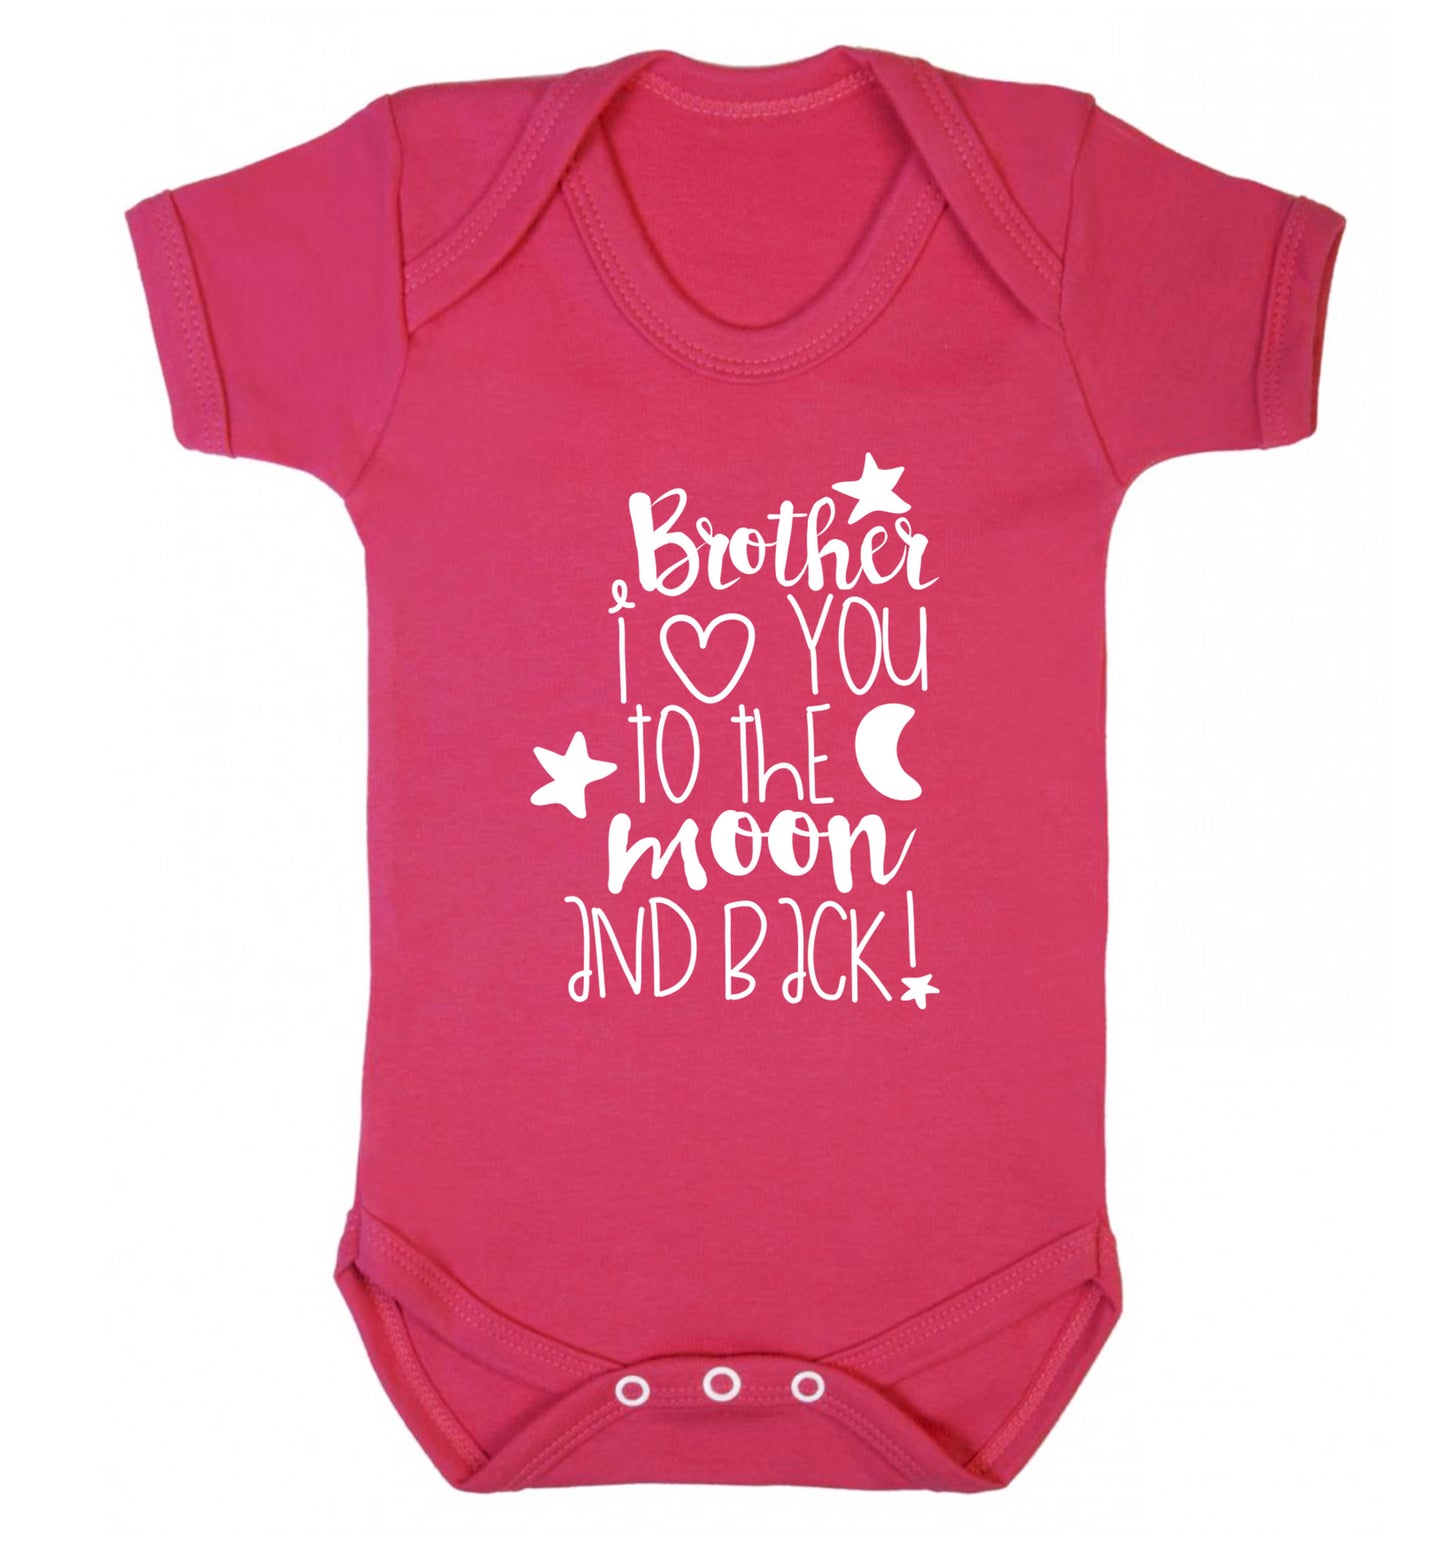 Brother I love you to the moon and back Baby Vest dark pink 18-24 months